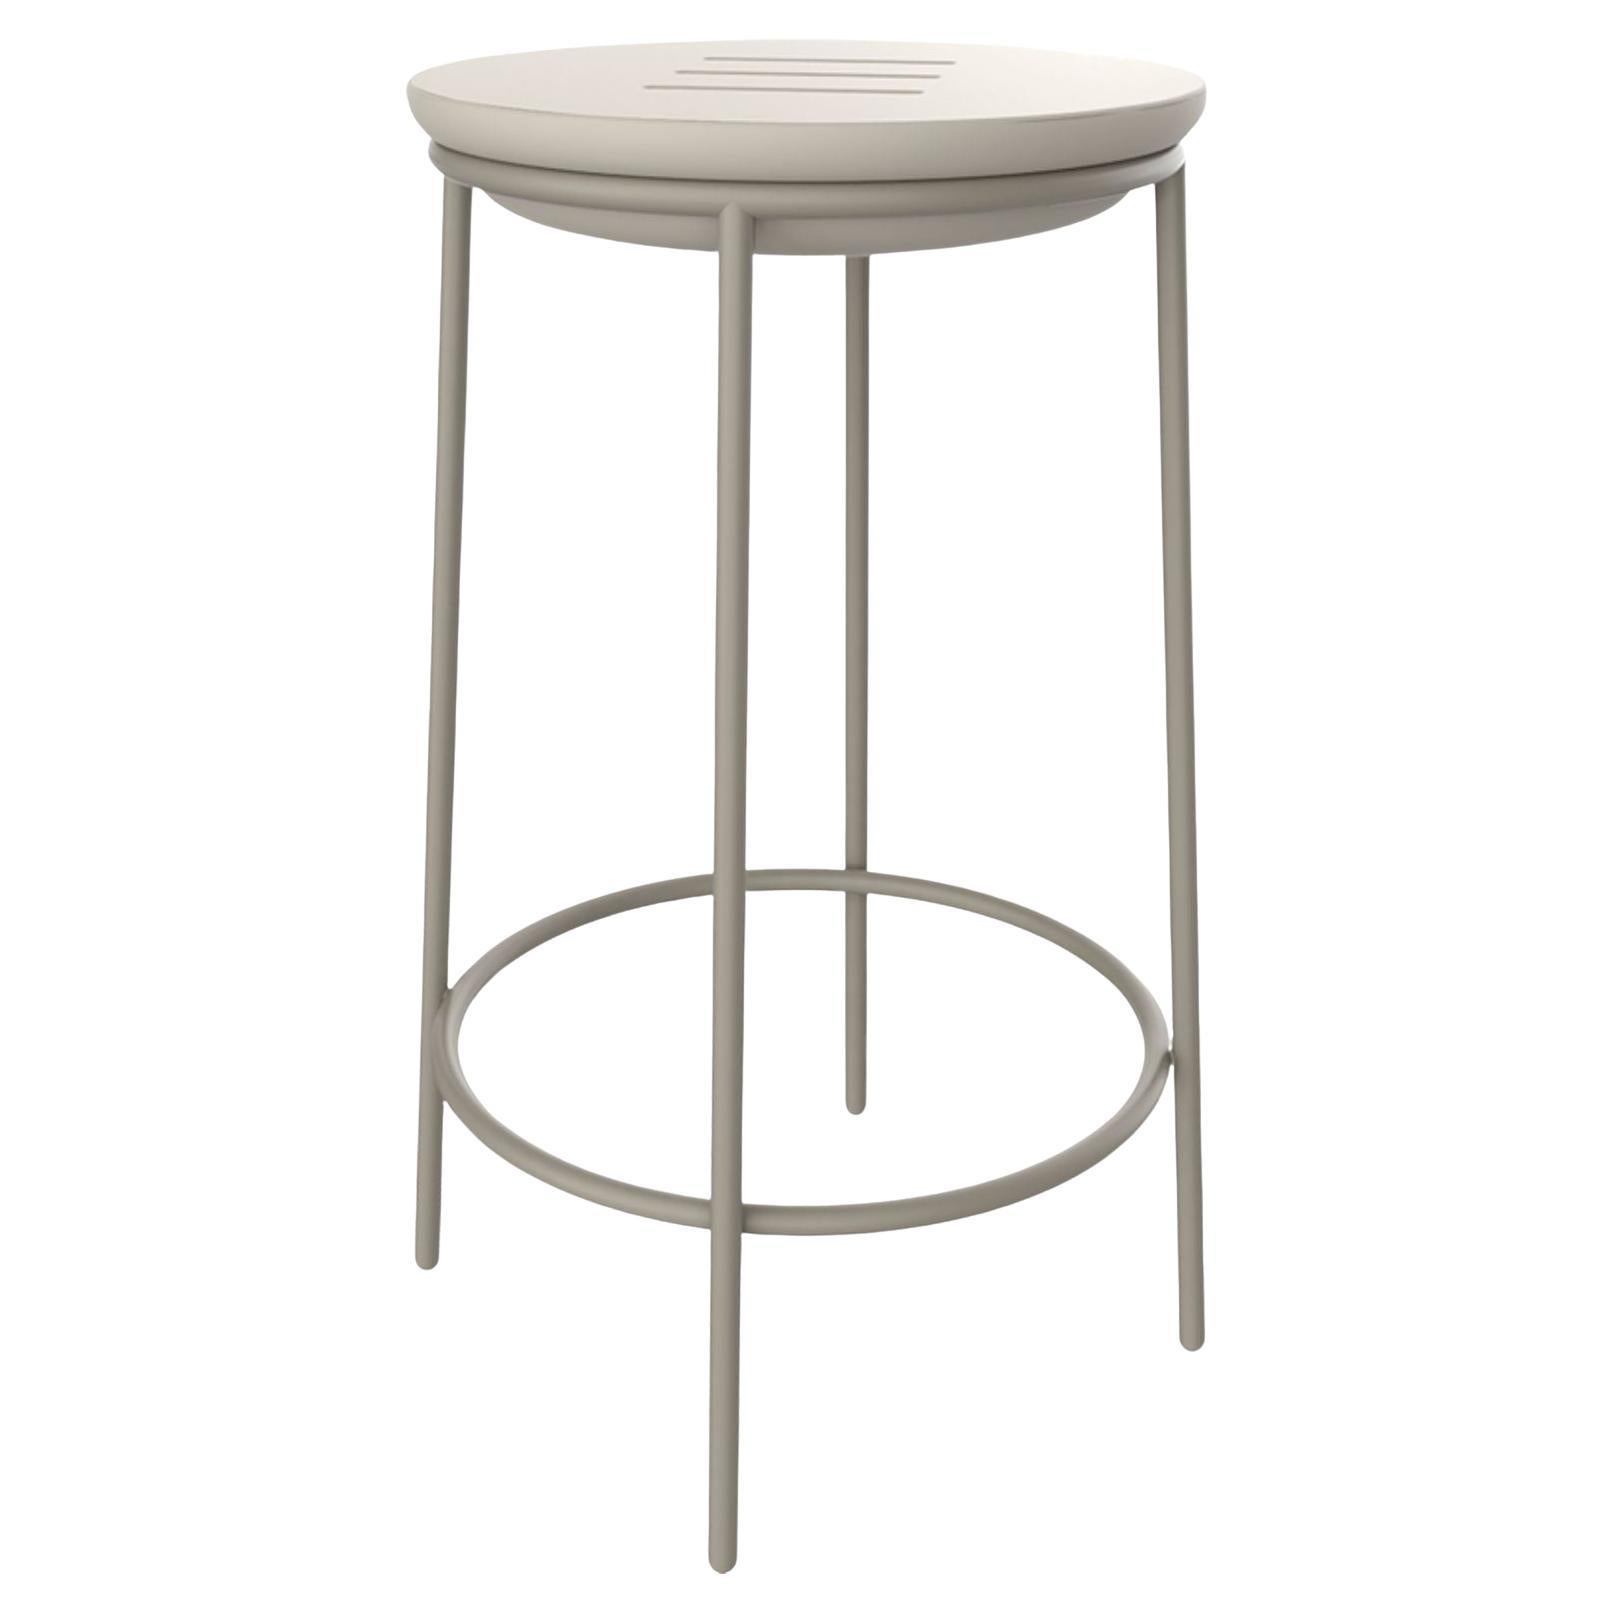 Lace Cream 60 High Table by Mowee For Sale